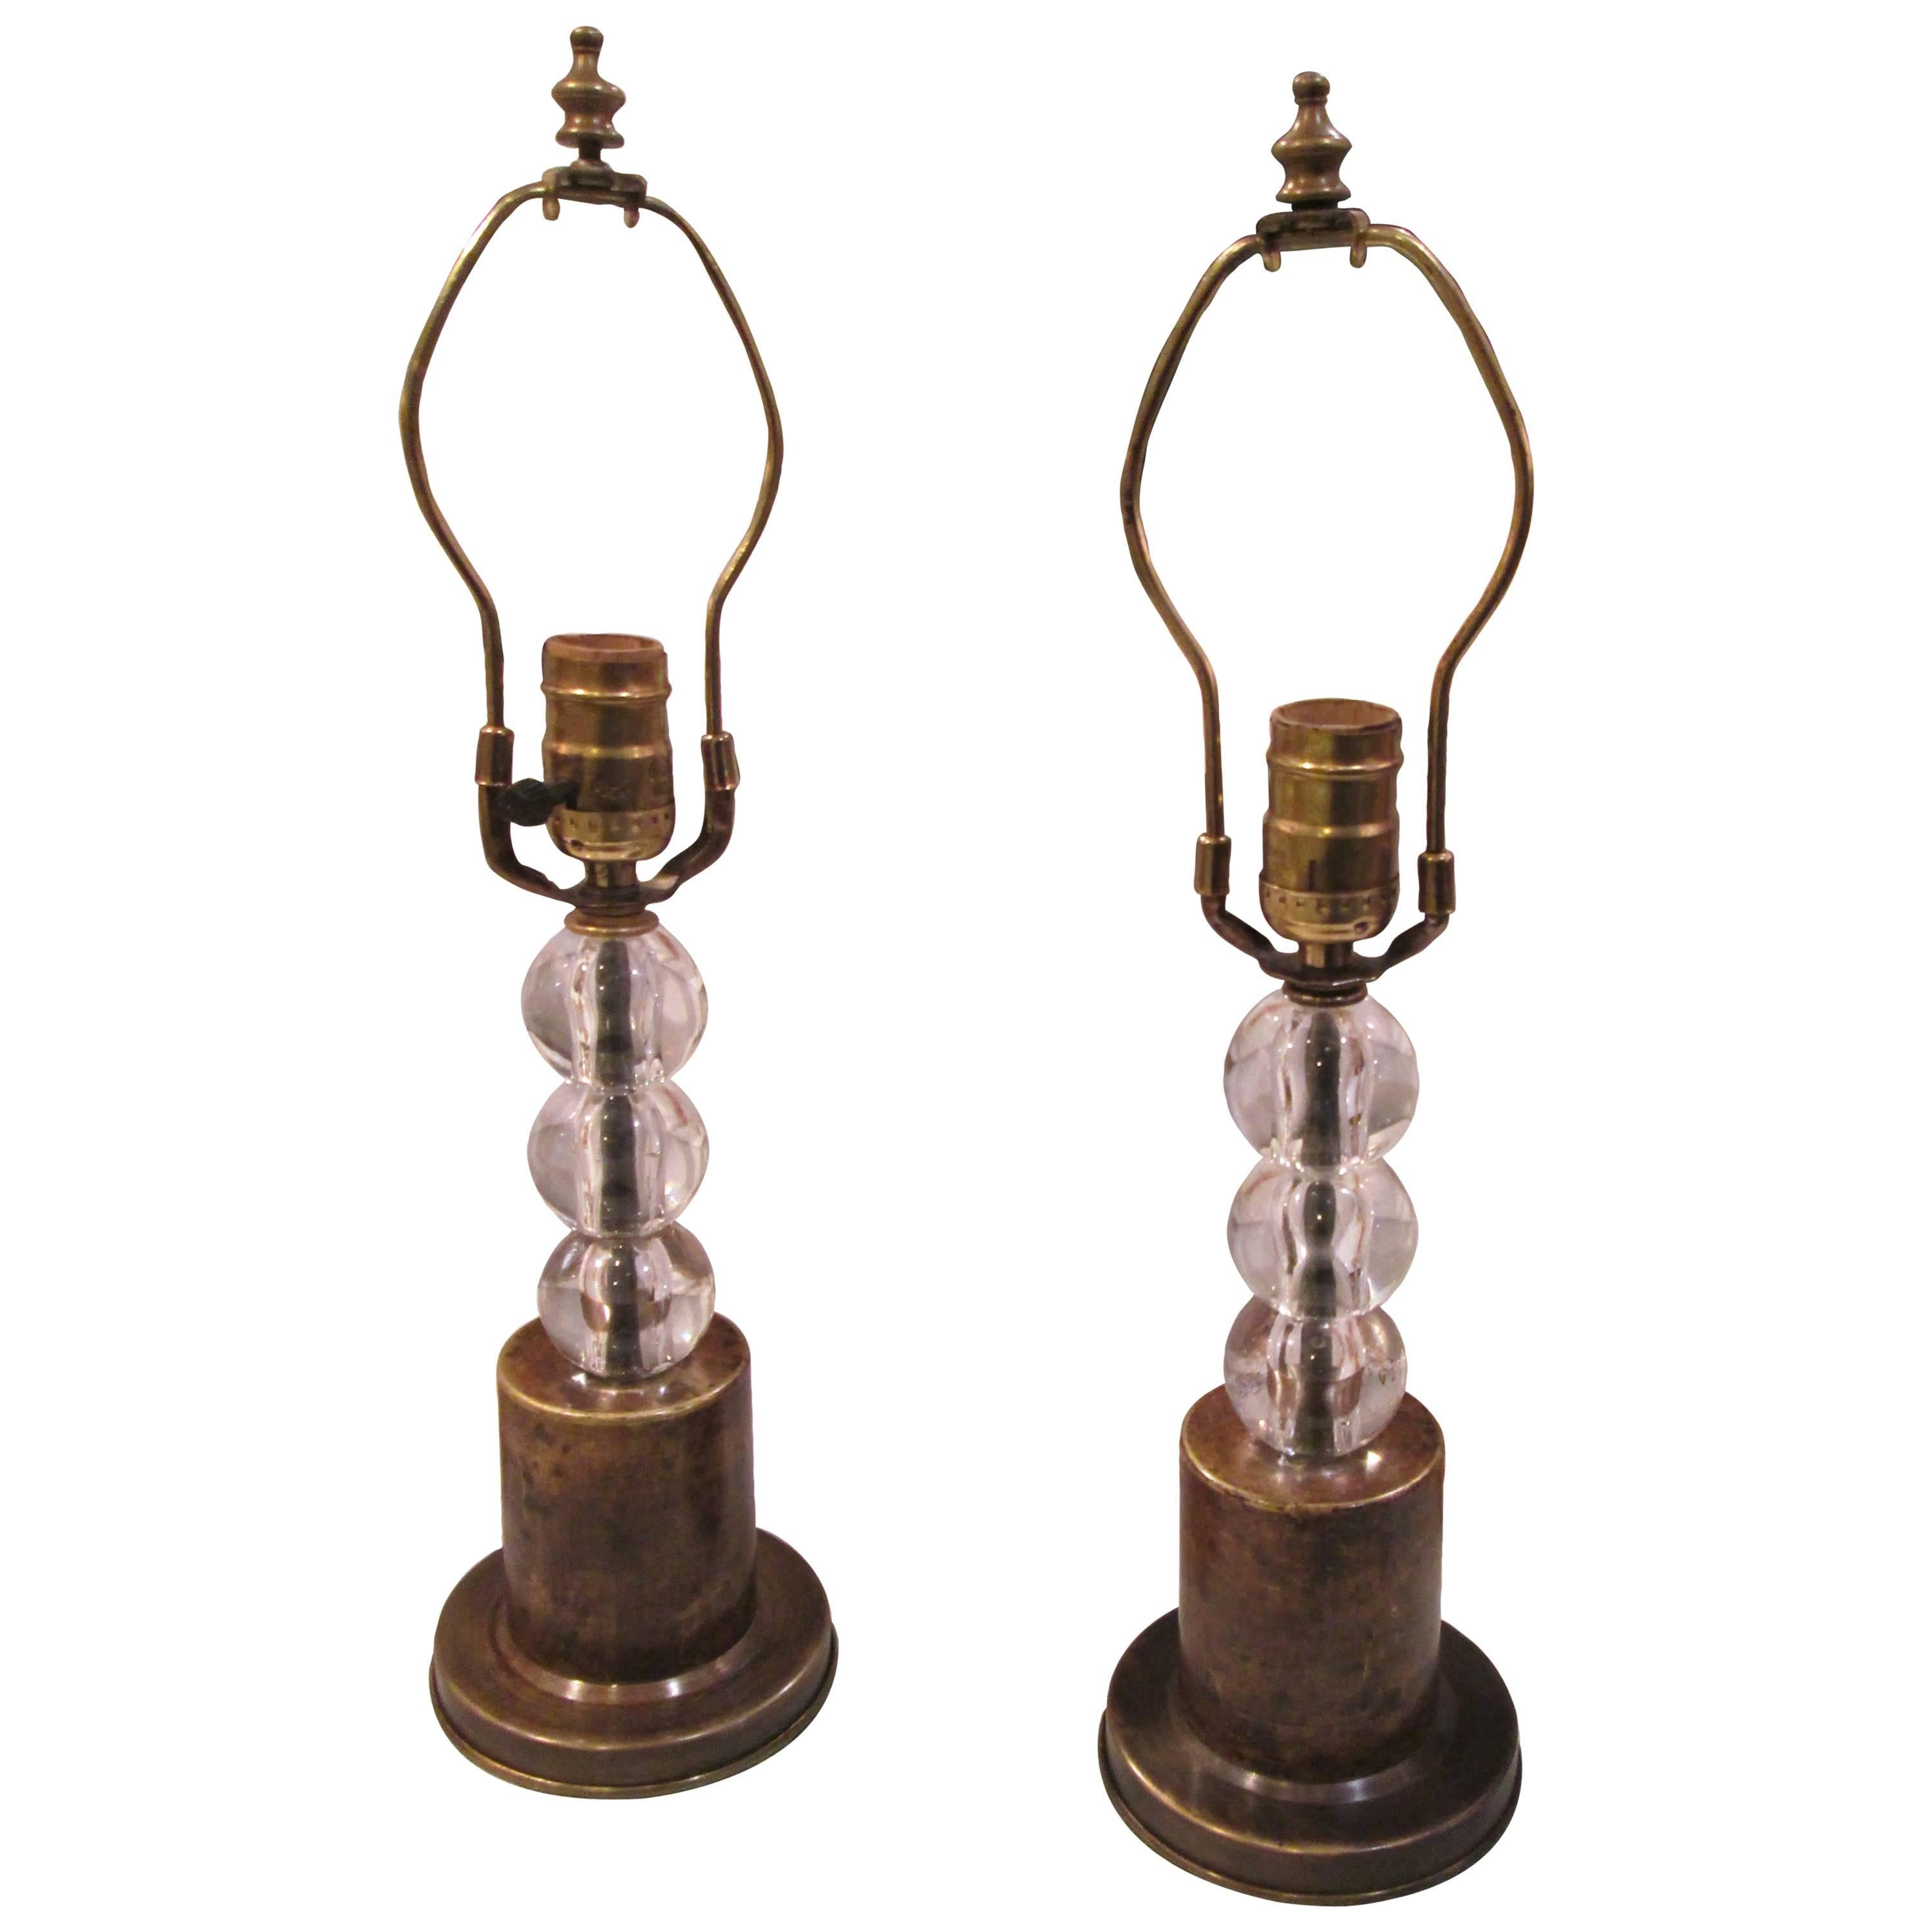 A pair of boudoir lamps with crystal orbs on brass base.